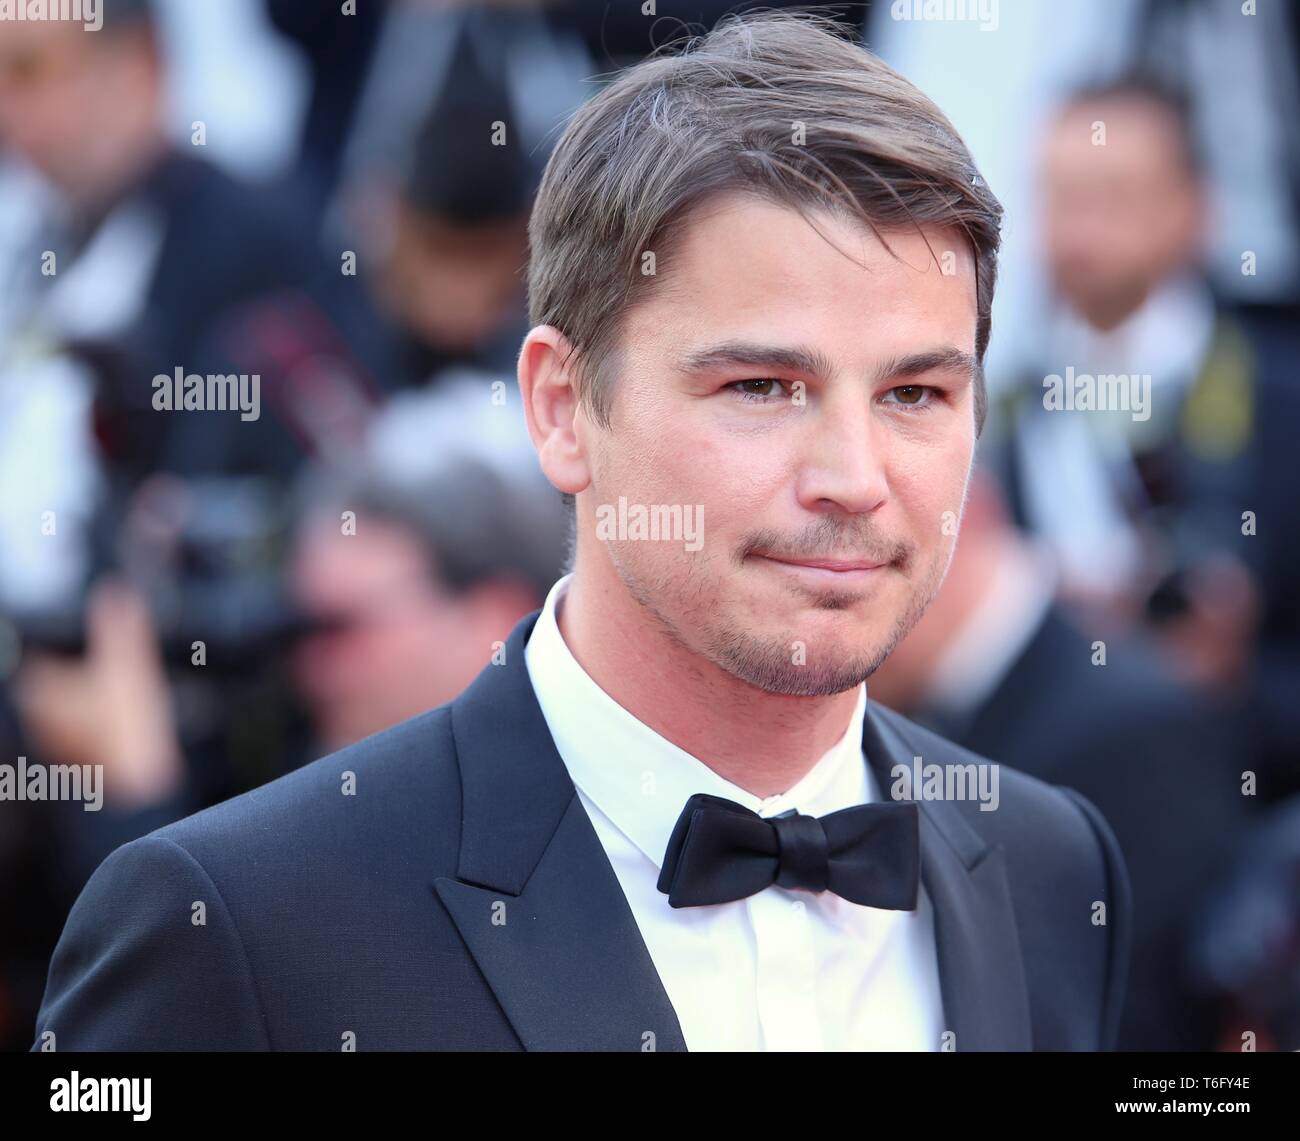 CANNES, FRANCE – MAY 22, 2017: Josh Hartnett attends 'The Killing of a Sacred Deer' screening at the 70th Cannes Film Festival (Photo: Mickael Chavet) Stock Photo